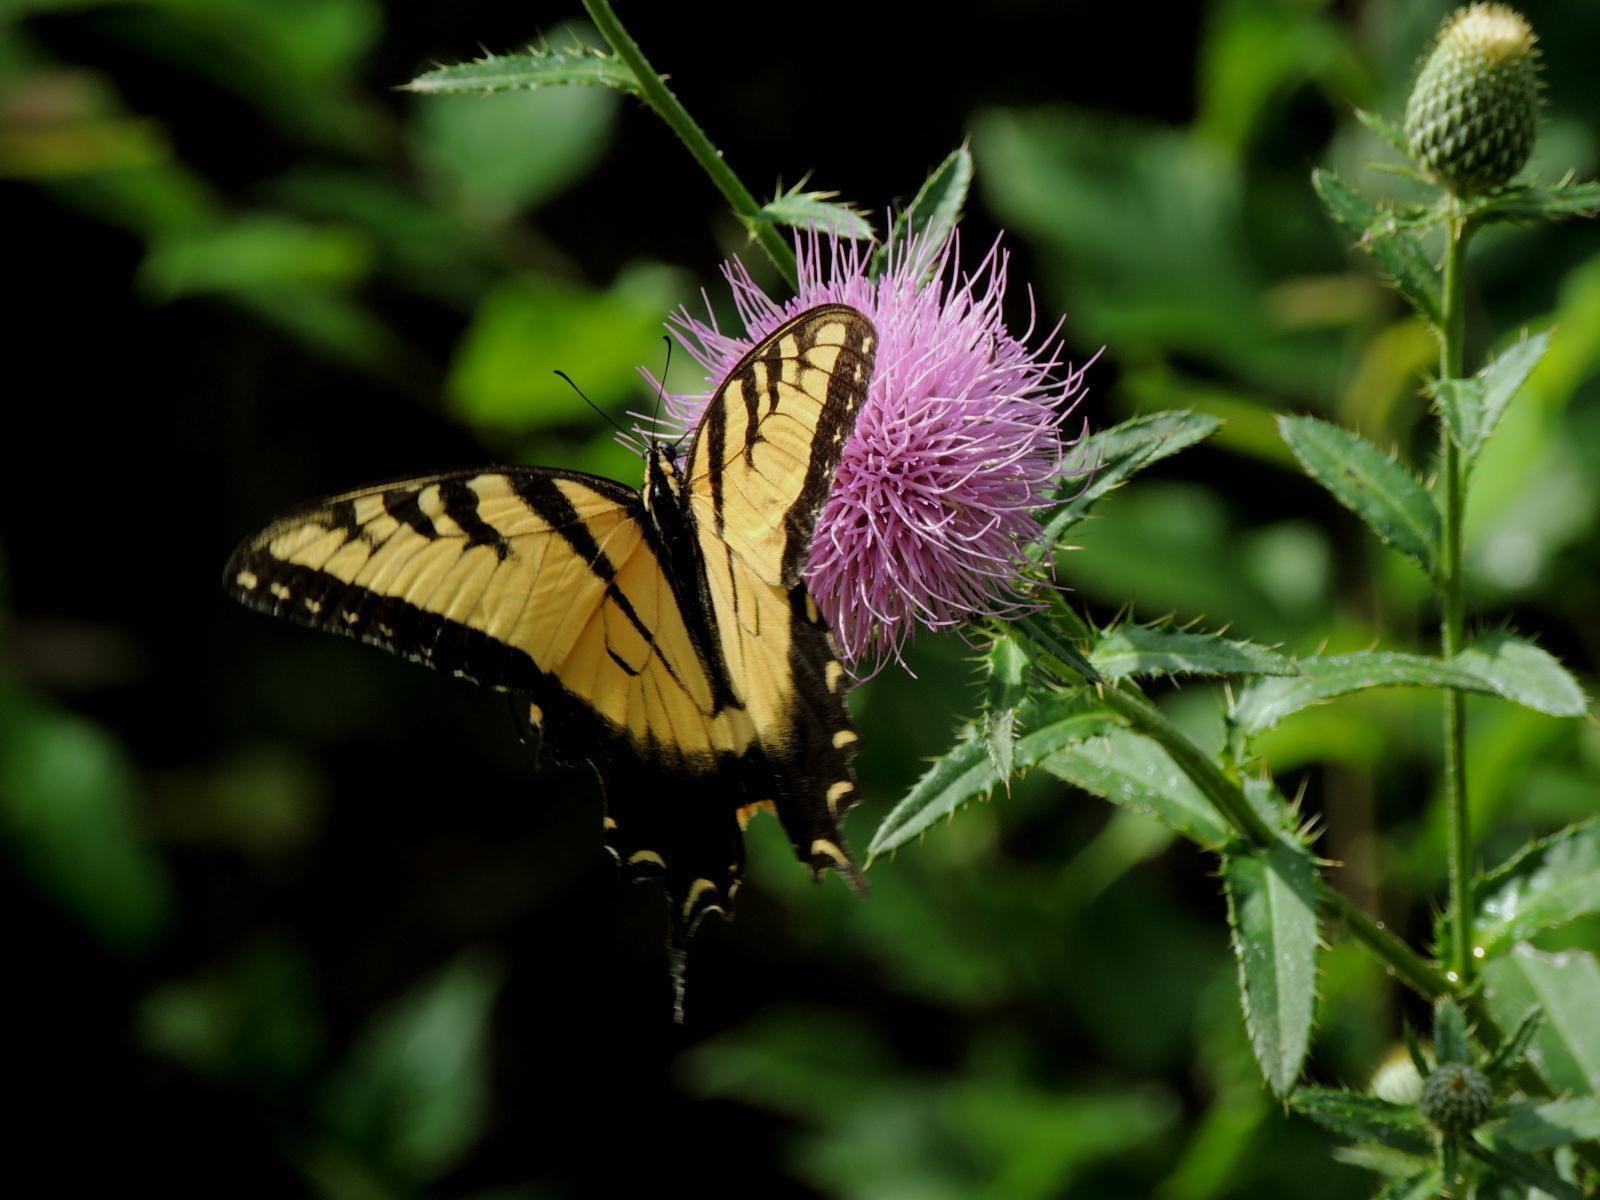 Eastern Tiger Swallowtail Photo by Tony Heindel